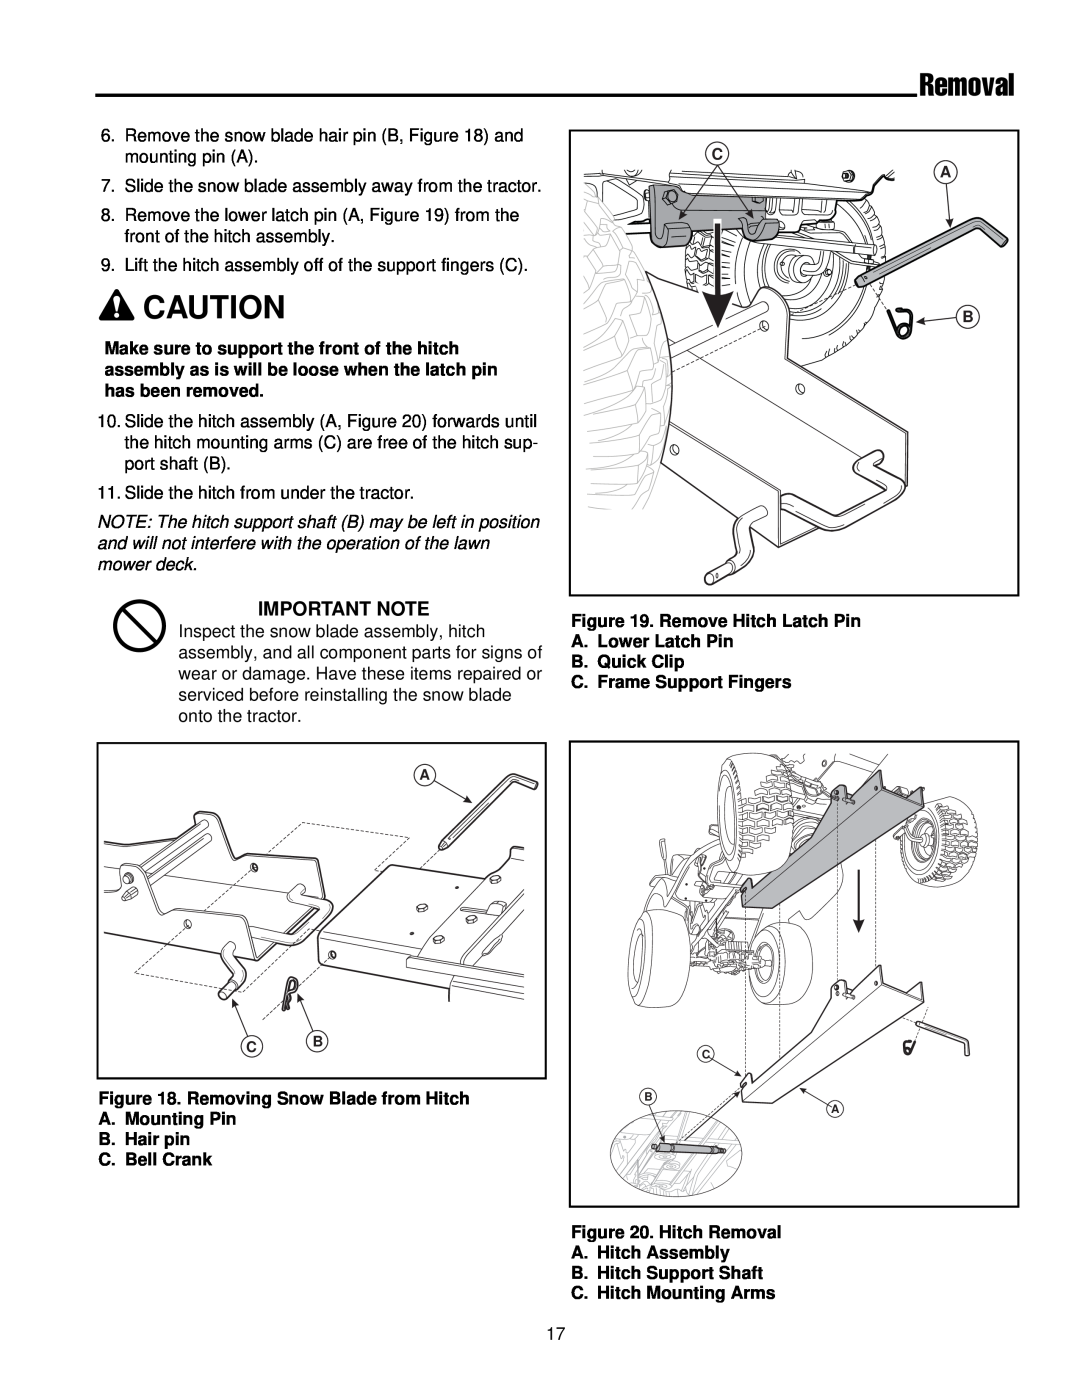 Briggs & Stratton 1694919 manual Removal, Important Note, Removing Snow Blade from Hitch A. Mounting Pin B. Hair pin 